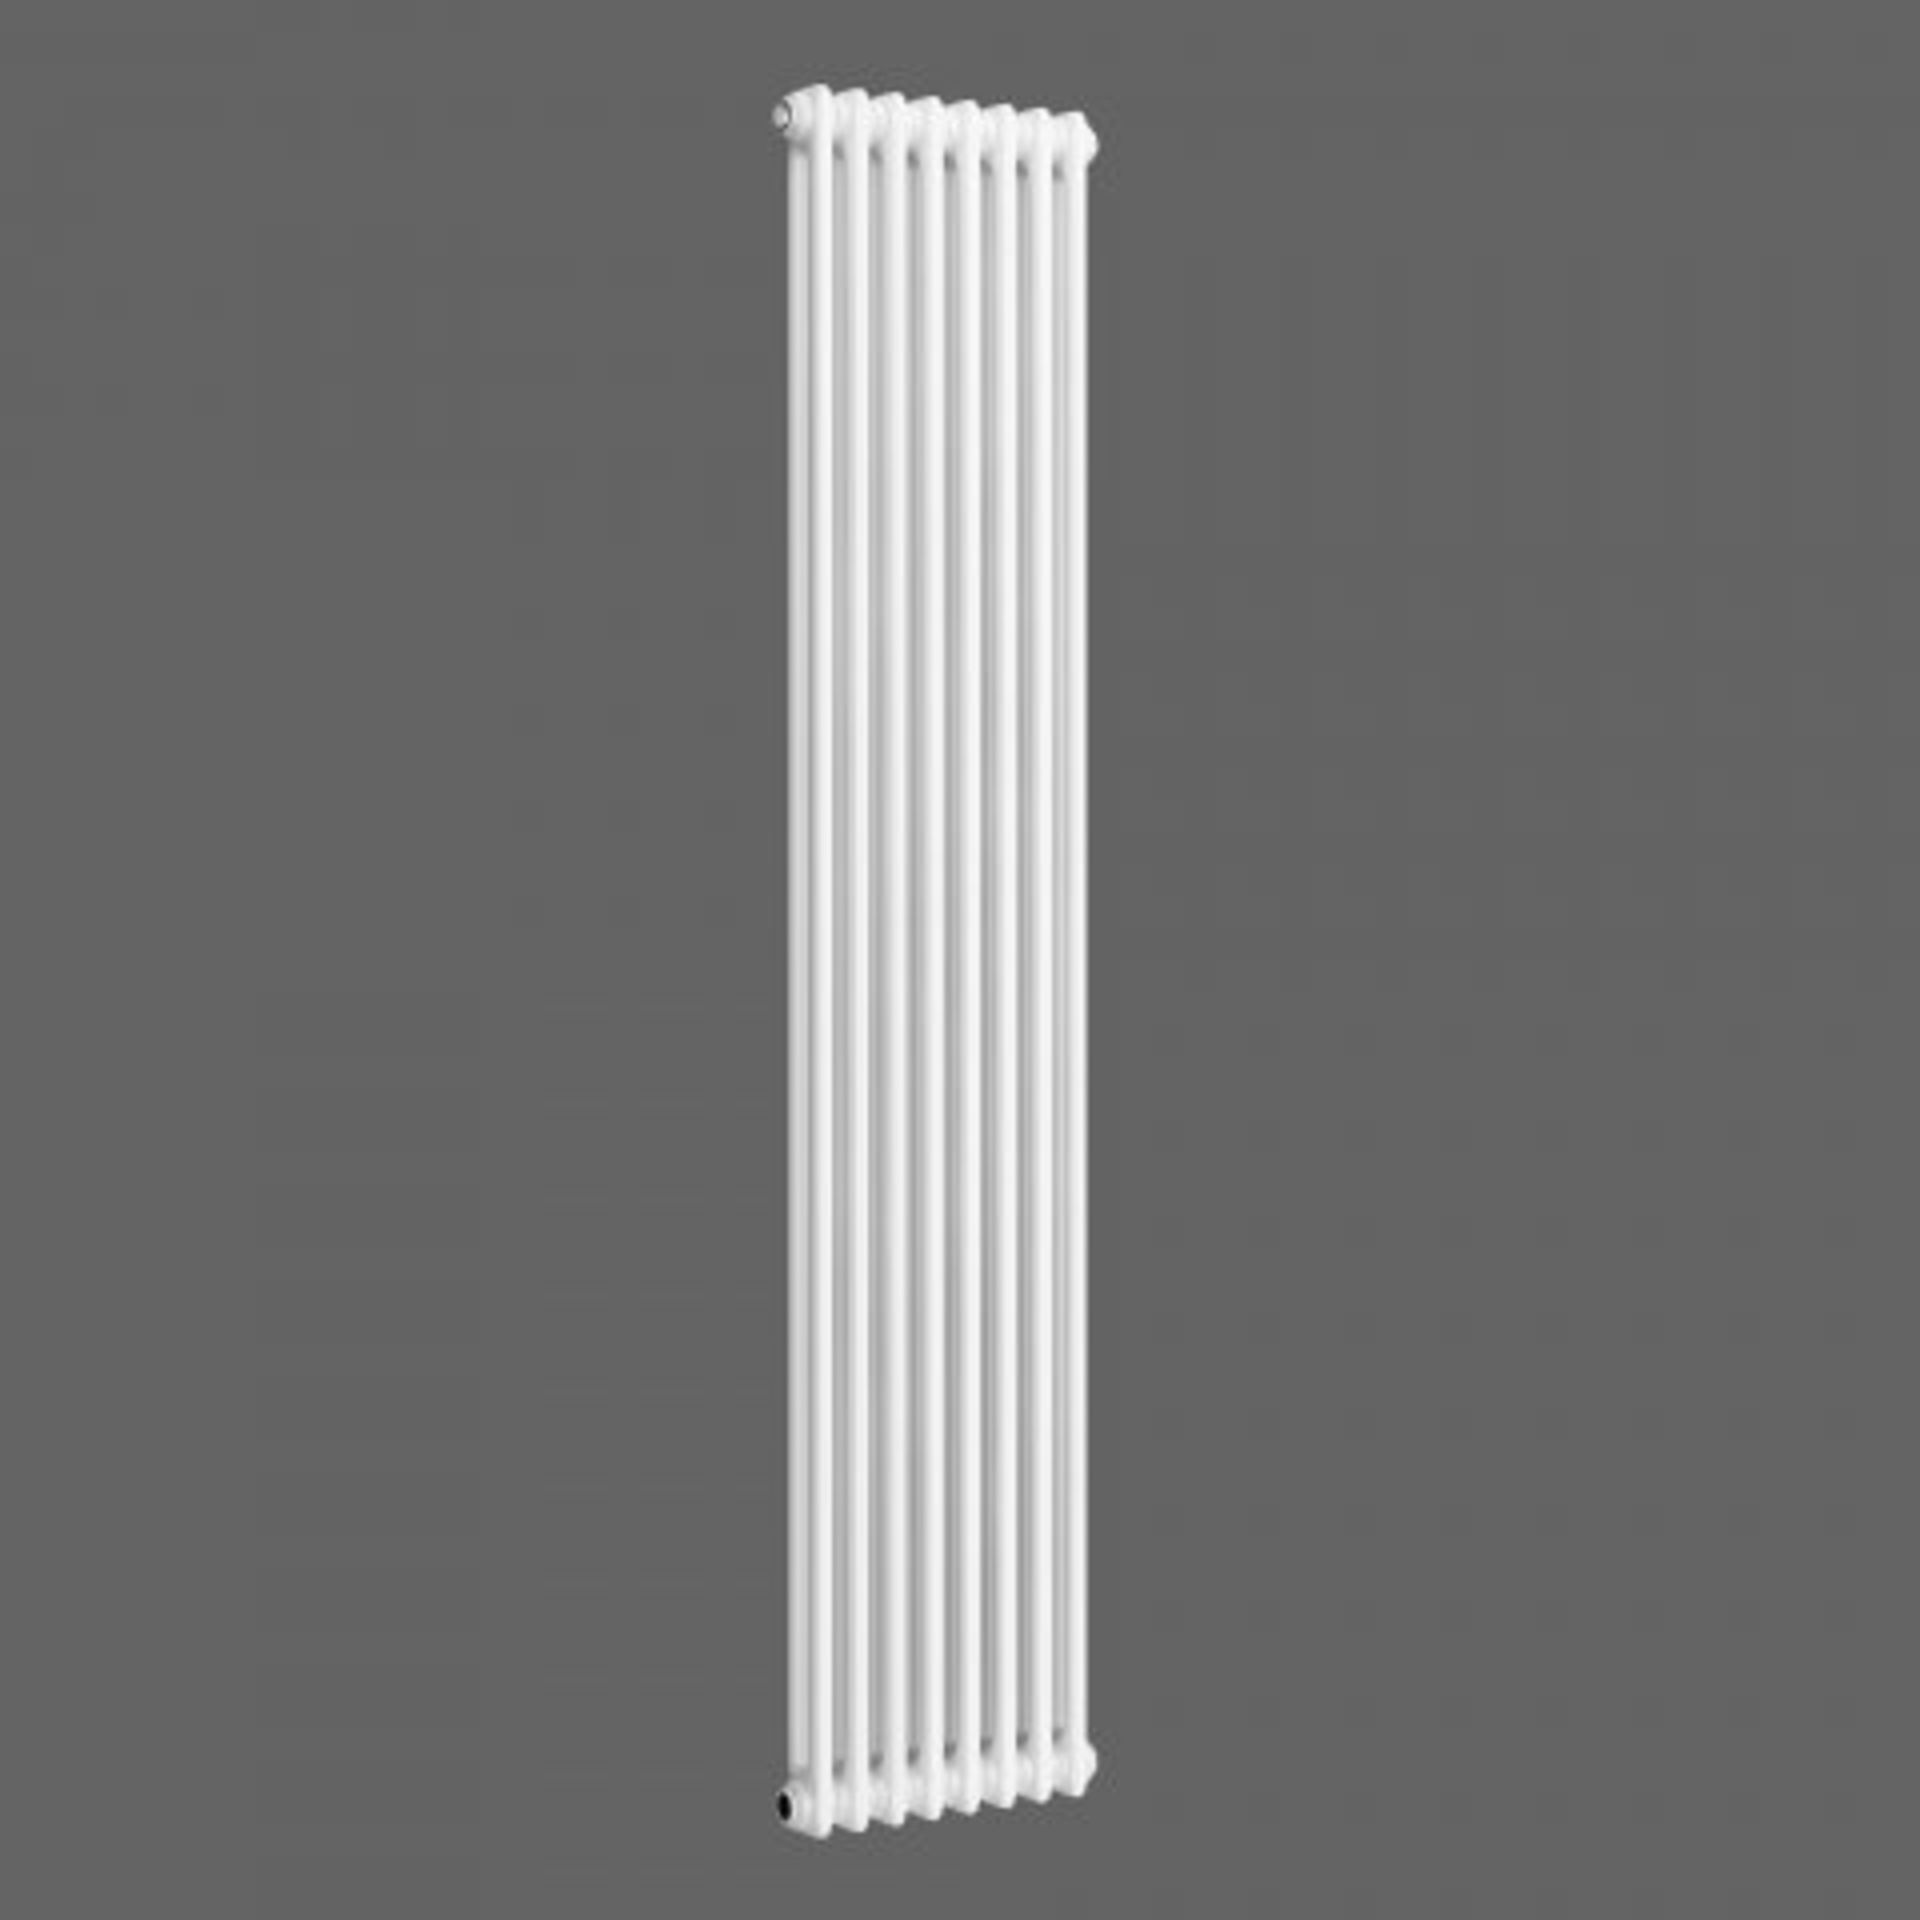 (N210) 1800x380mm White Double Panel Vertical Colosseum Traditional Radiator. RRP £355.99. For an - Image 3 of 5